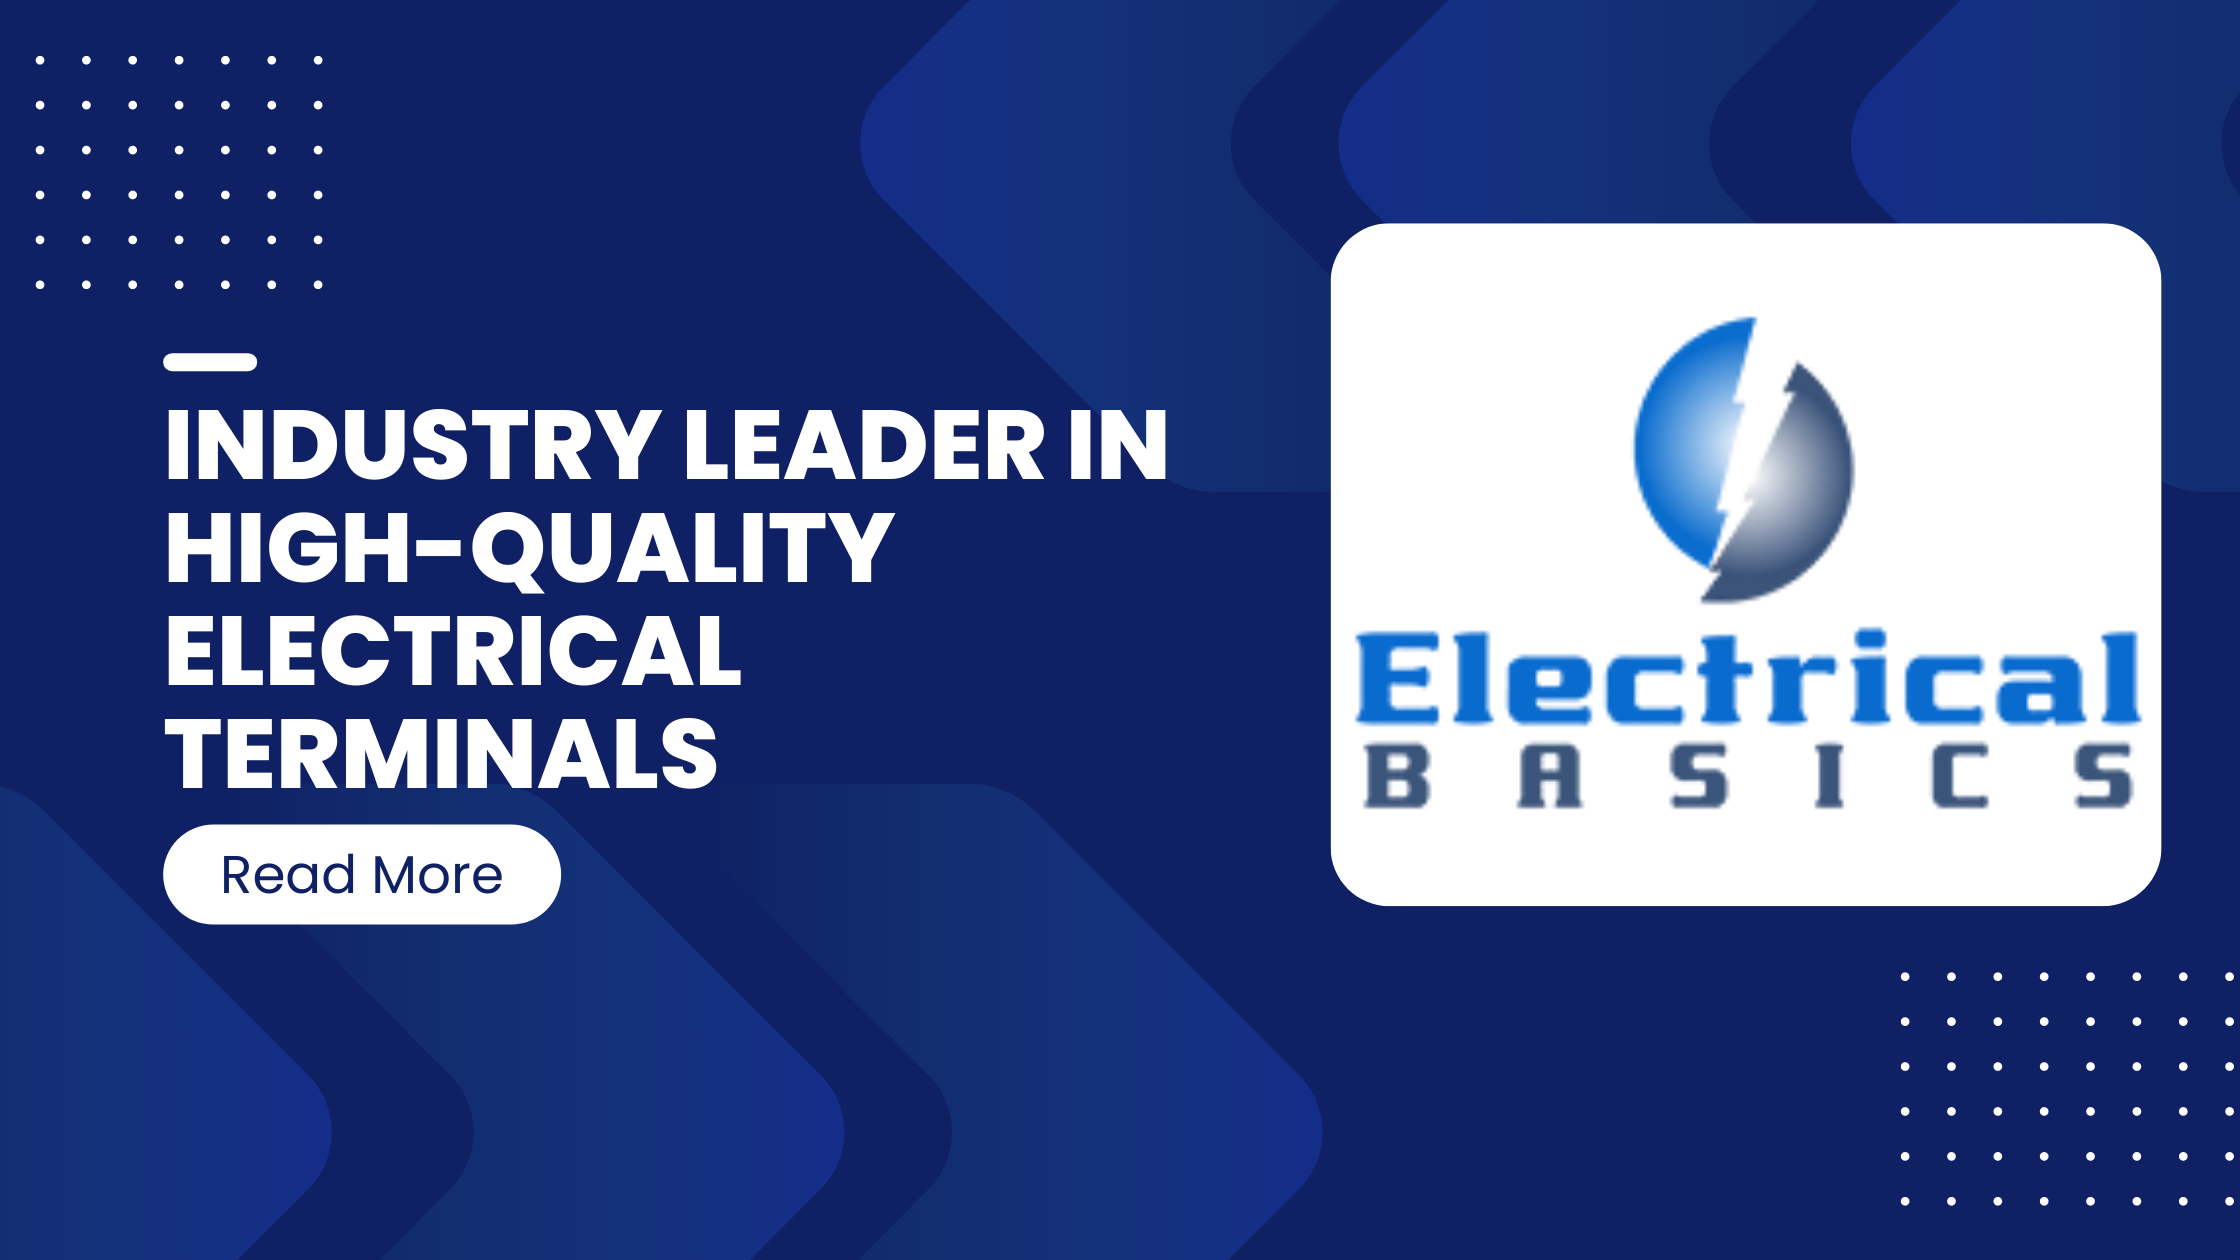 A LEADING PROVIDER OF SUPERIOR QUALITY ELECTRICAL TERMINALS